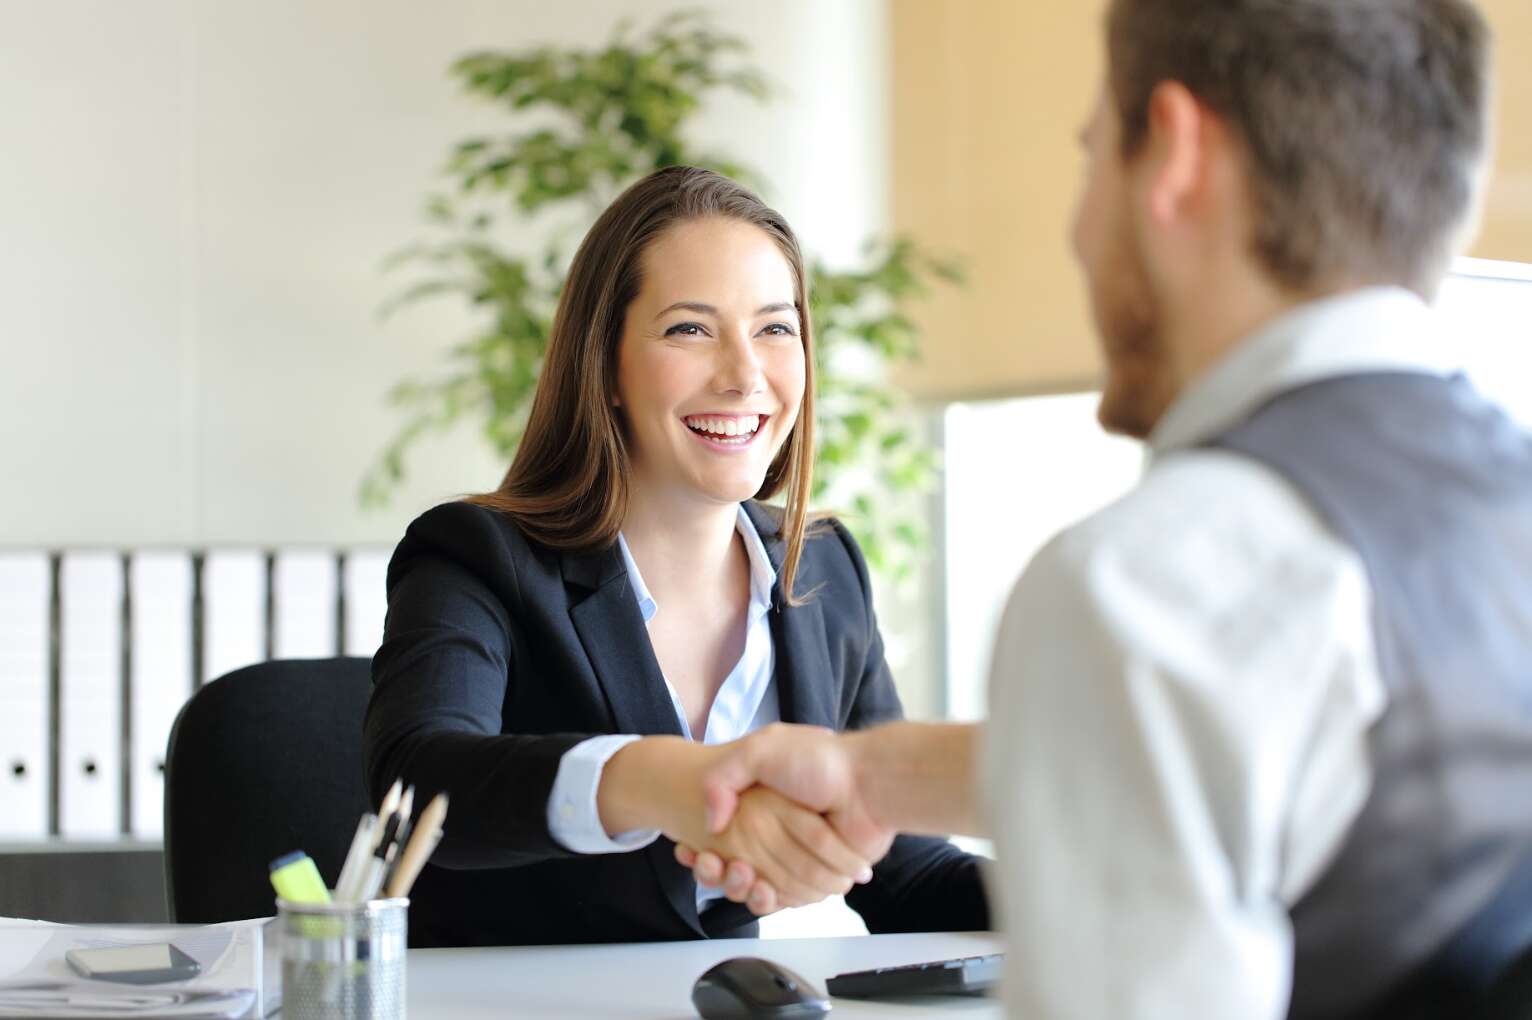 female applicant shaking hands with job interviewer